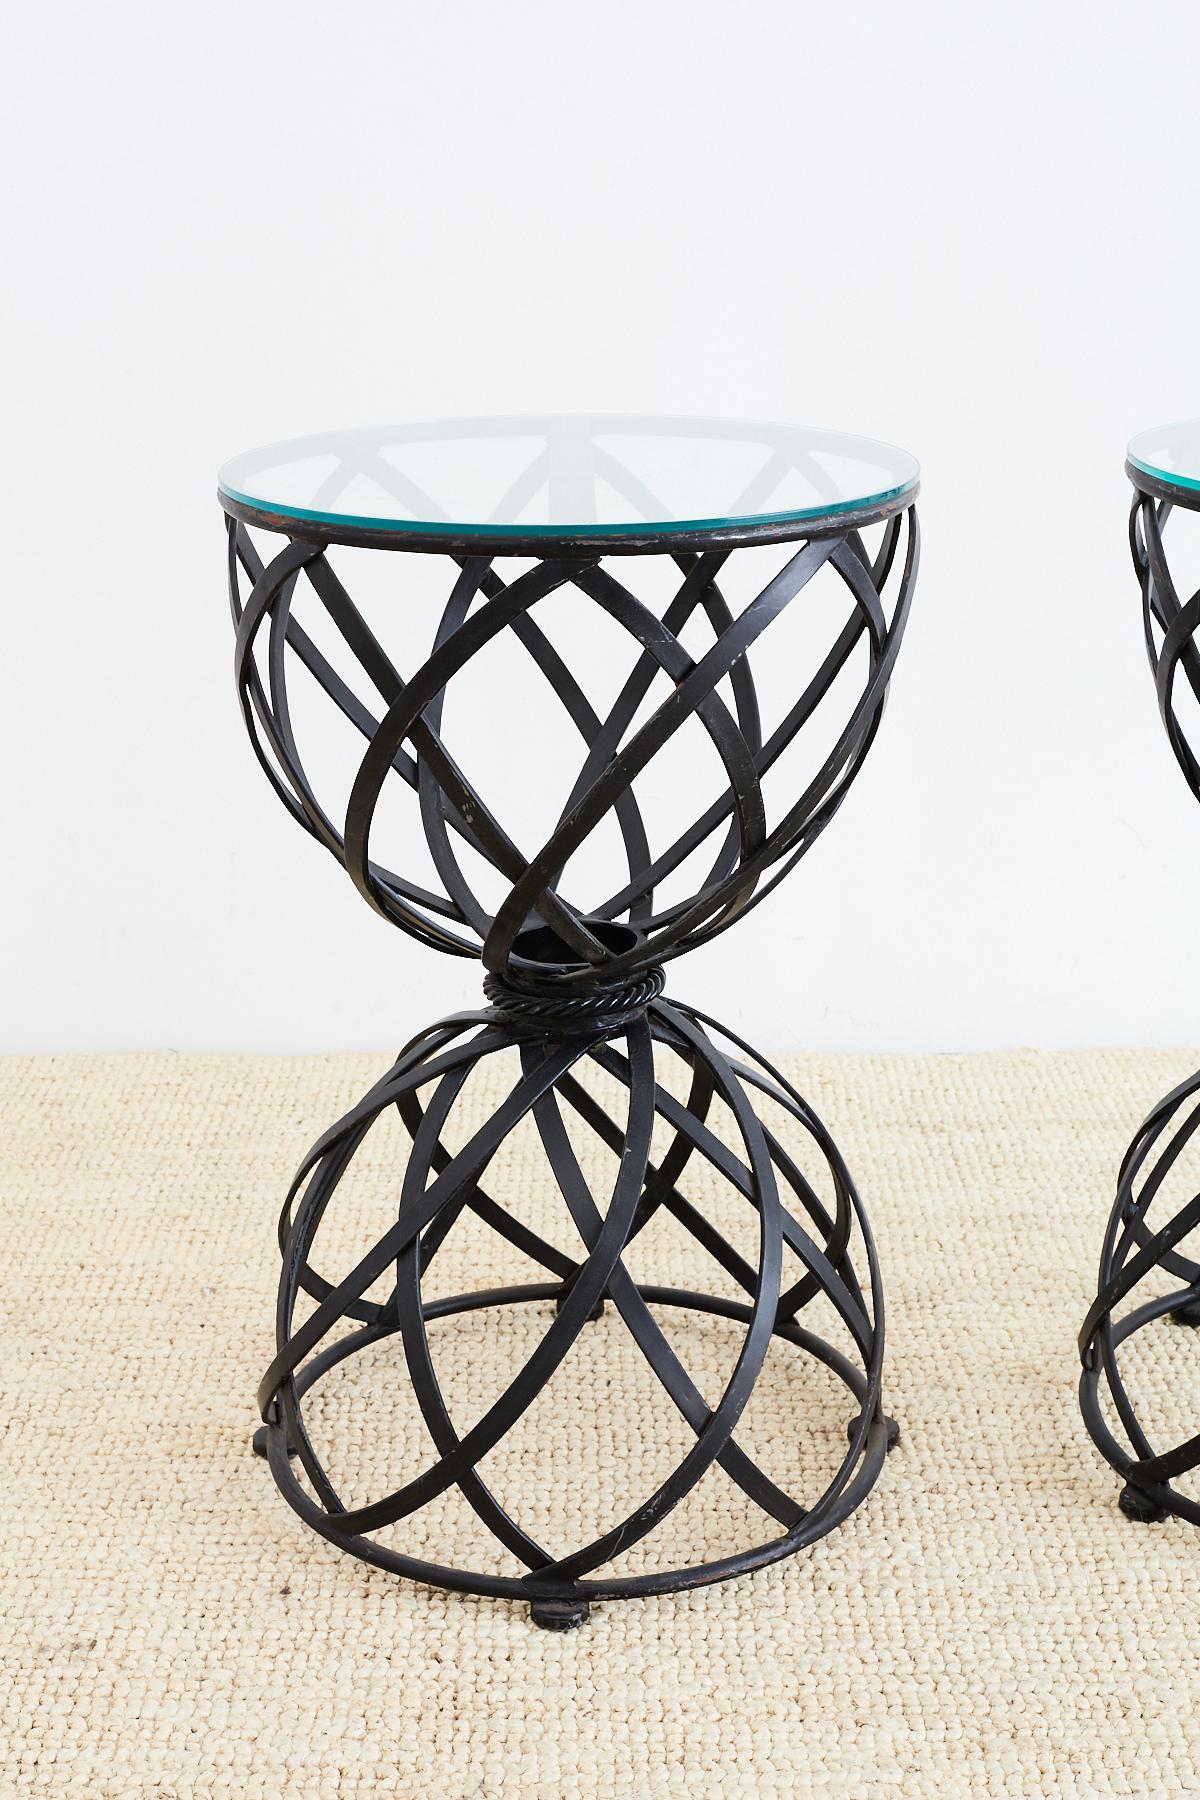 Pair of Woven Iron Basket Design Drinks Tables 1